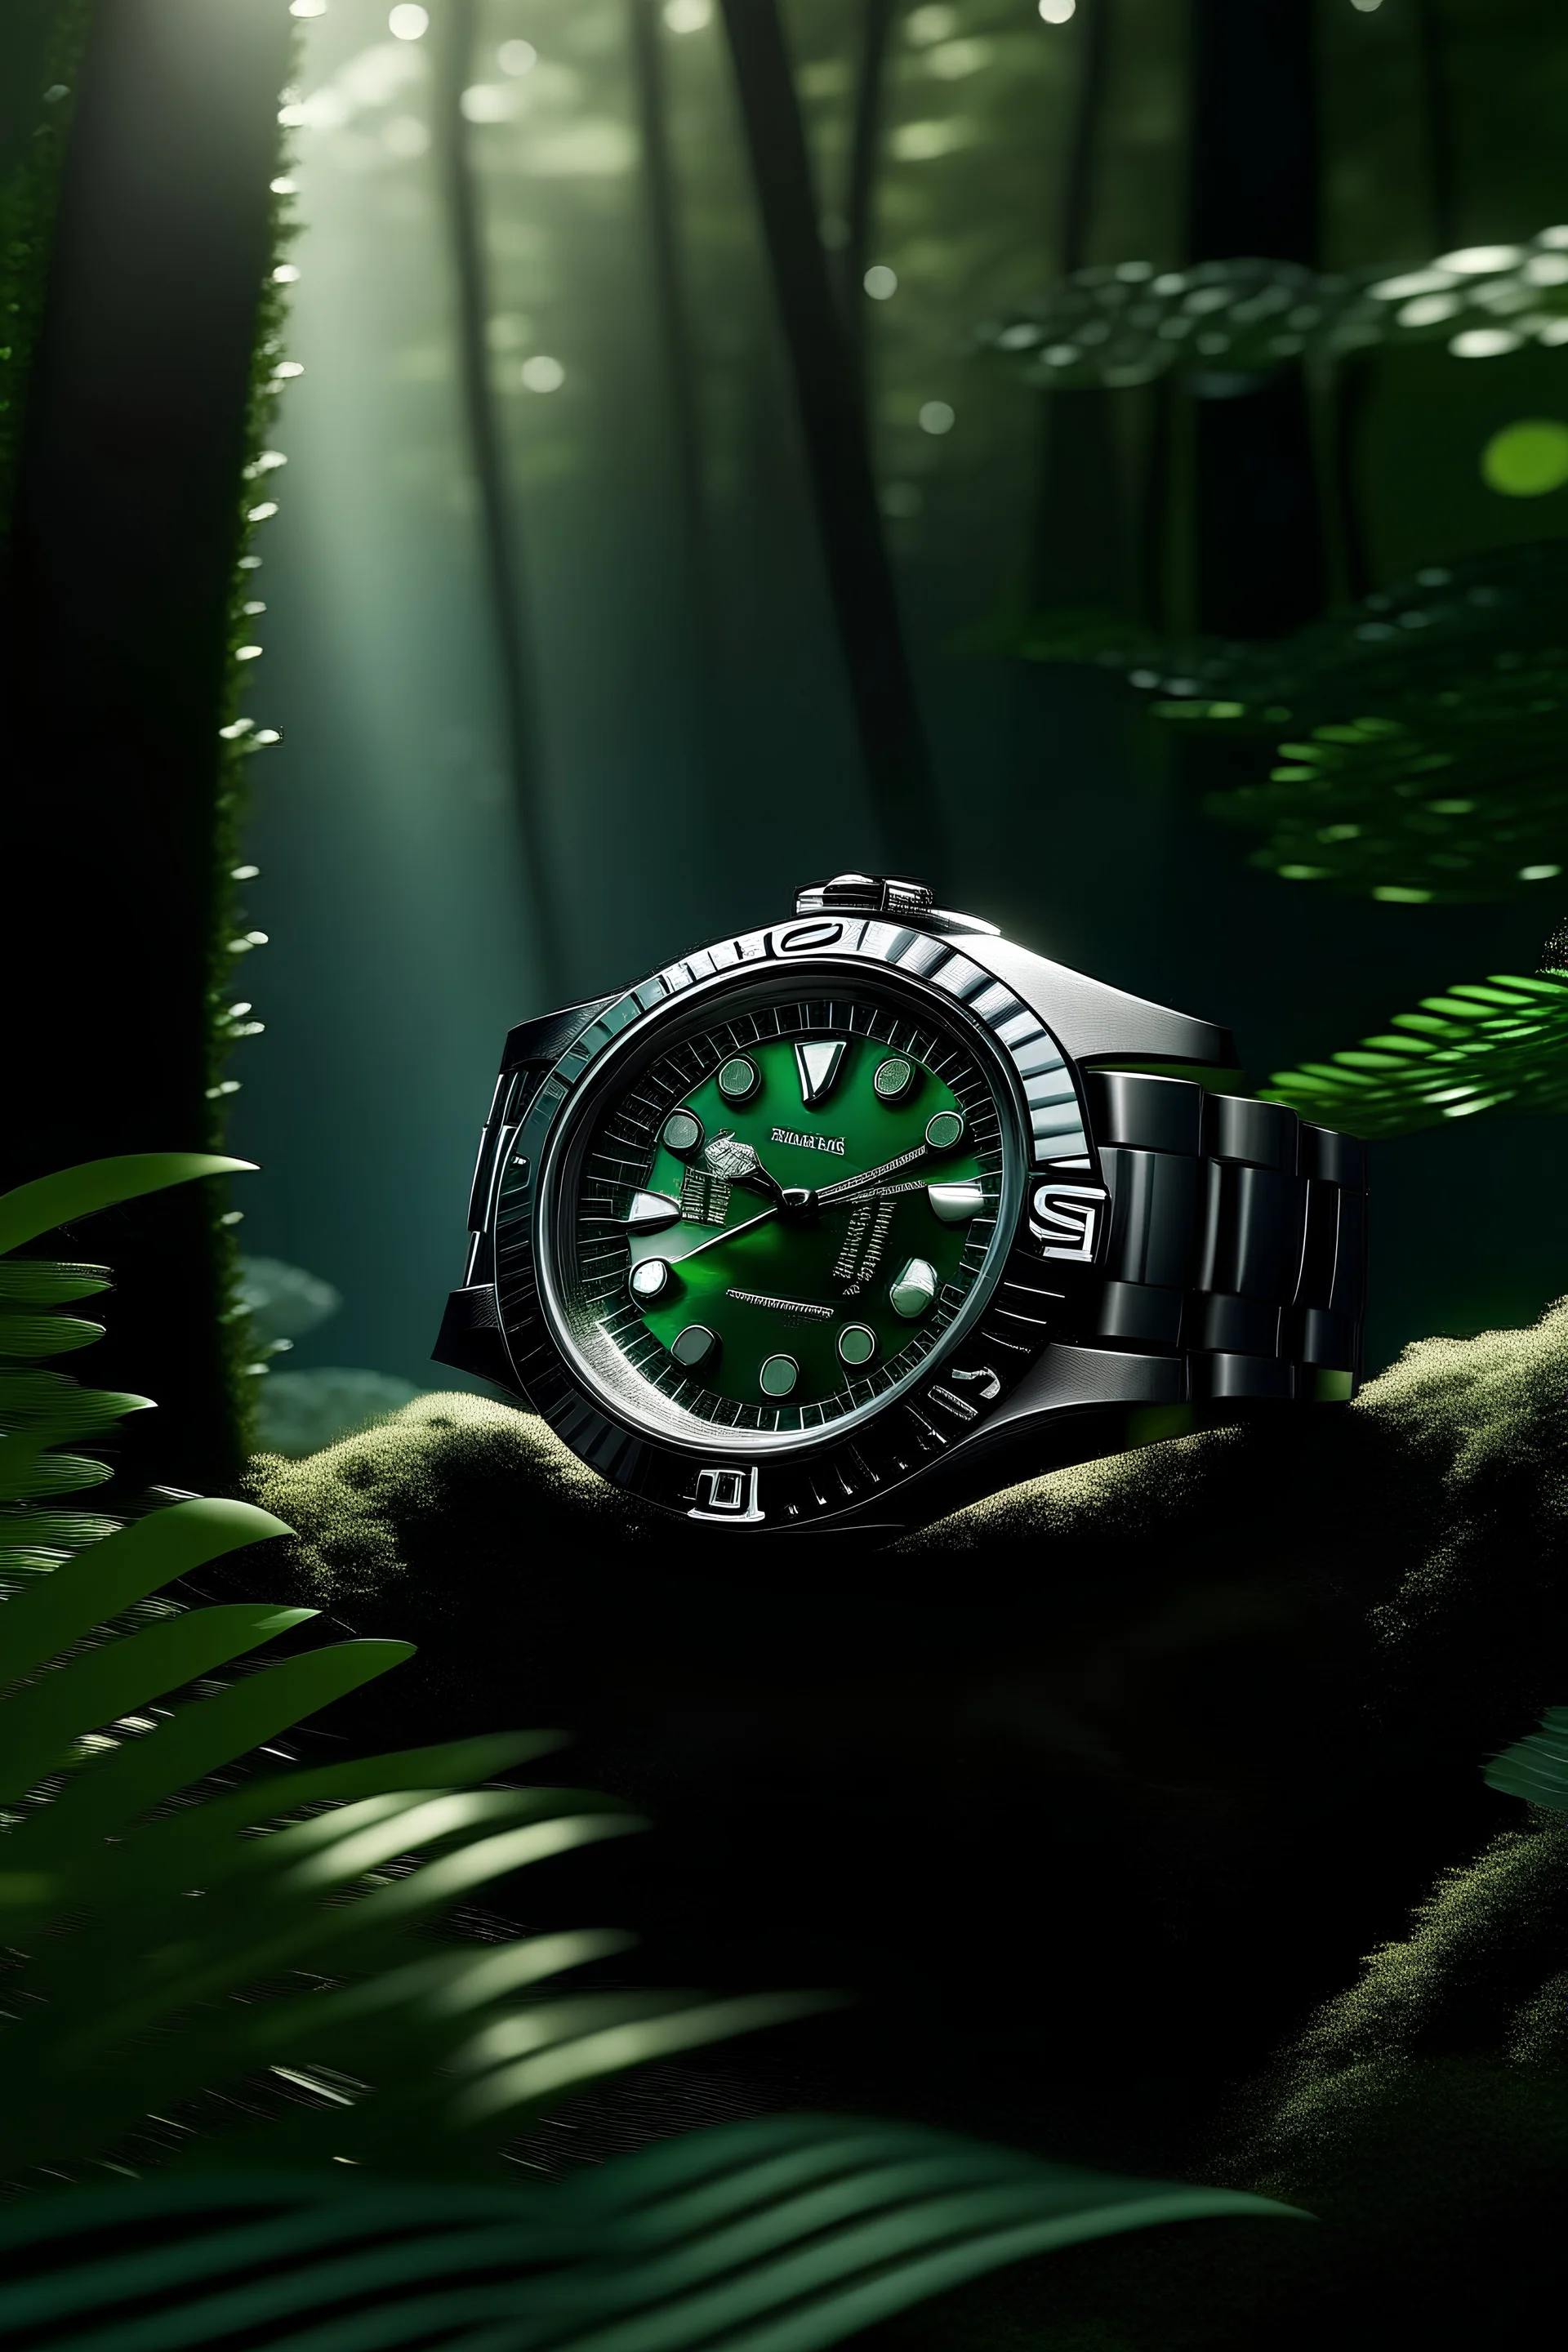 Generate an image of the Cartier Diver watch in a serene forest environment, emphasizing the stability of nature and the watch's enduring design.